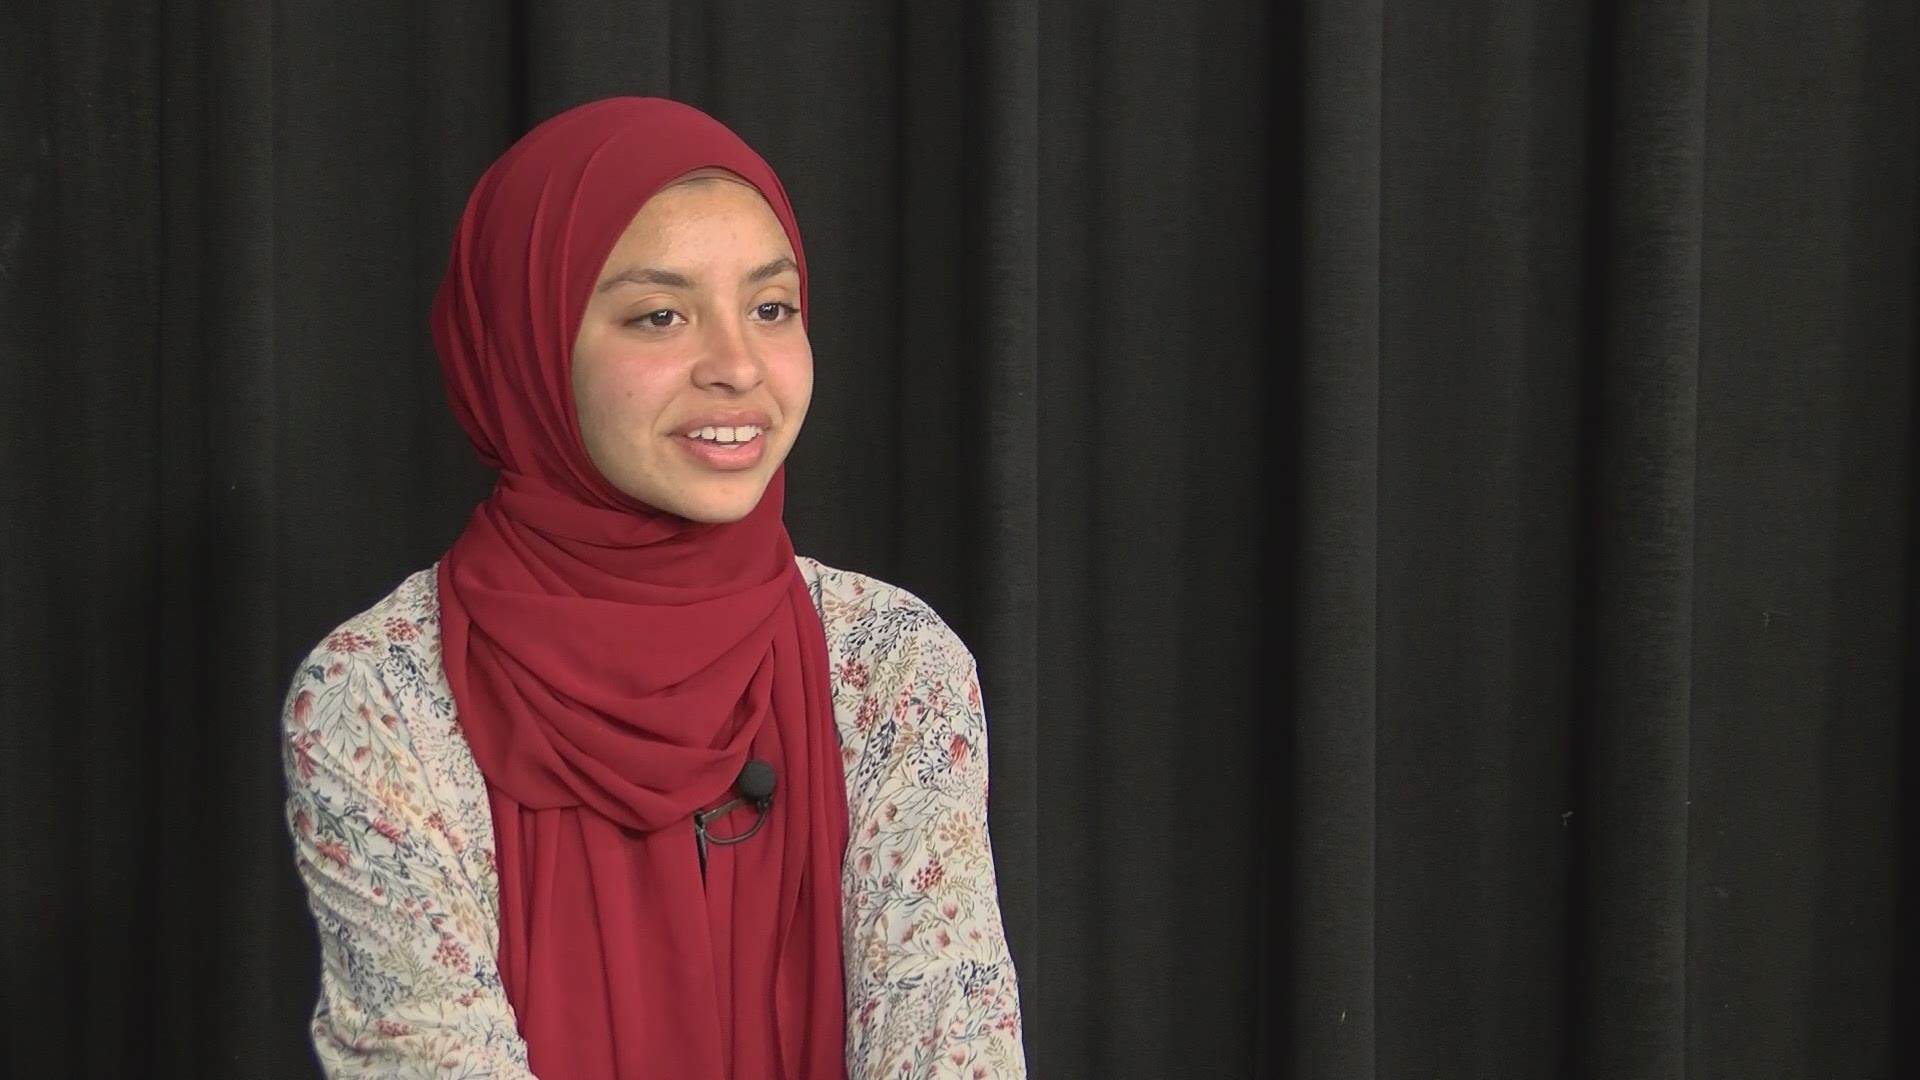 Noor Abukaram is a junior in high school and proudly wears her Nike sport hijab when running for Sylvania Northview. It's never been a problem for the past 3 years.